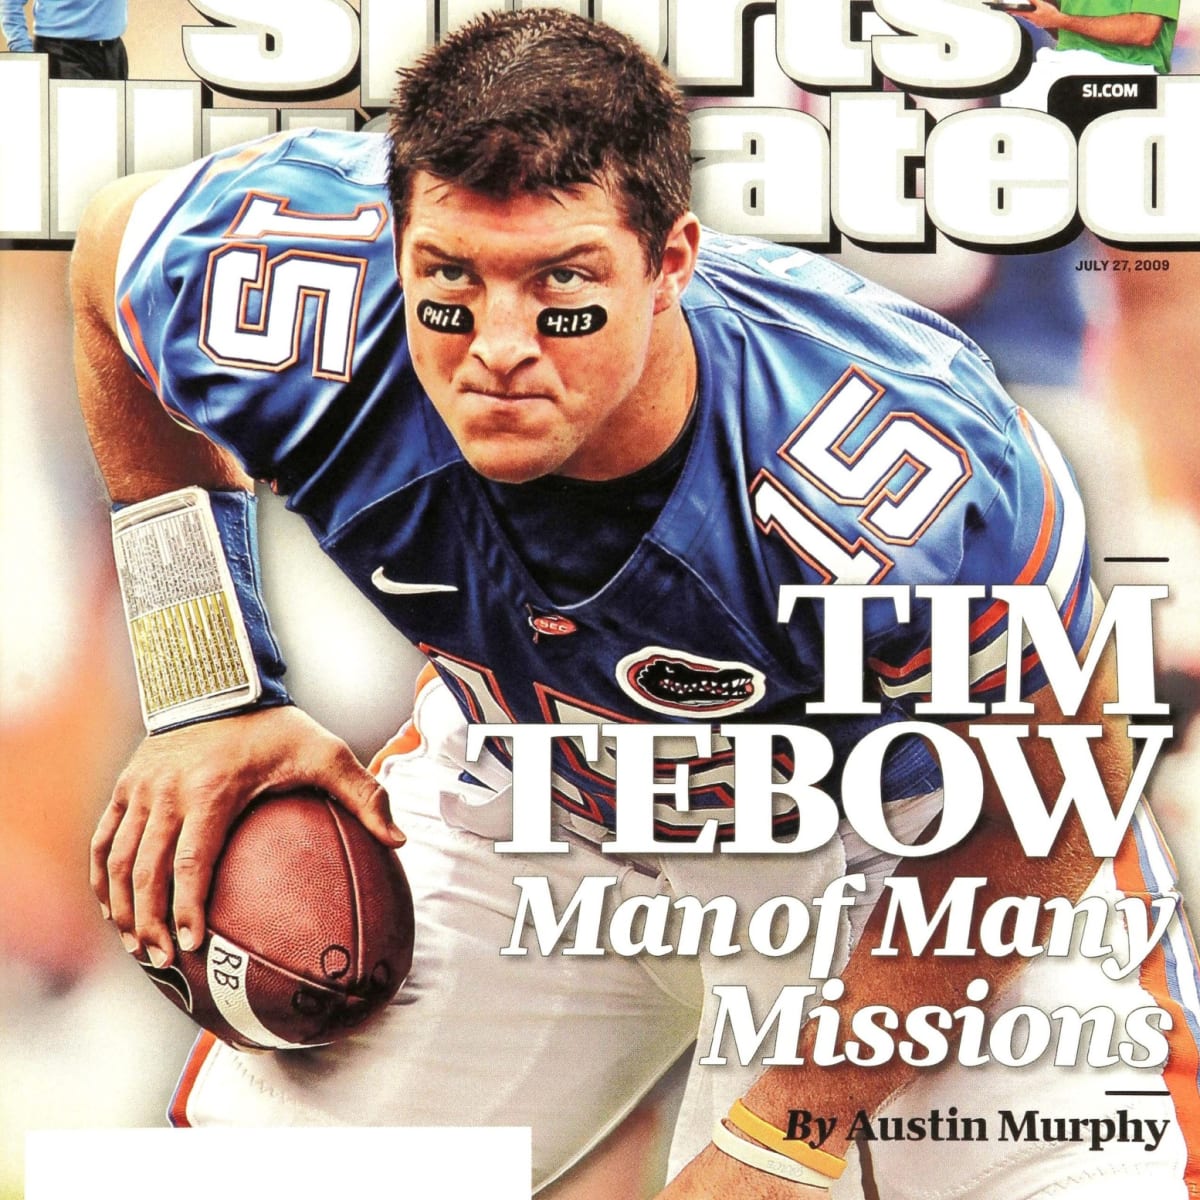 Murphy's Law Is Nice Guys Finish First - Sports Illustrated Vault